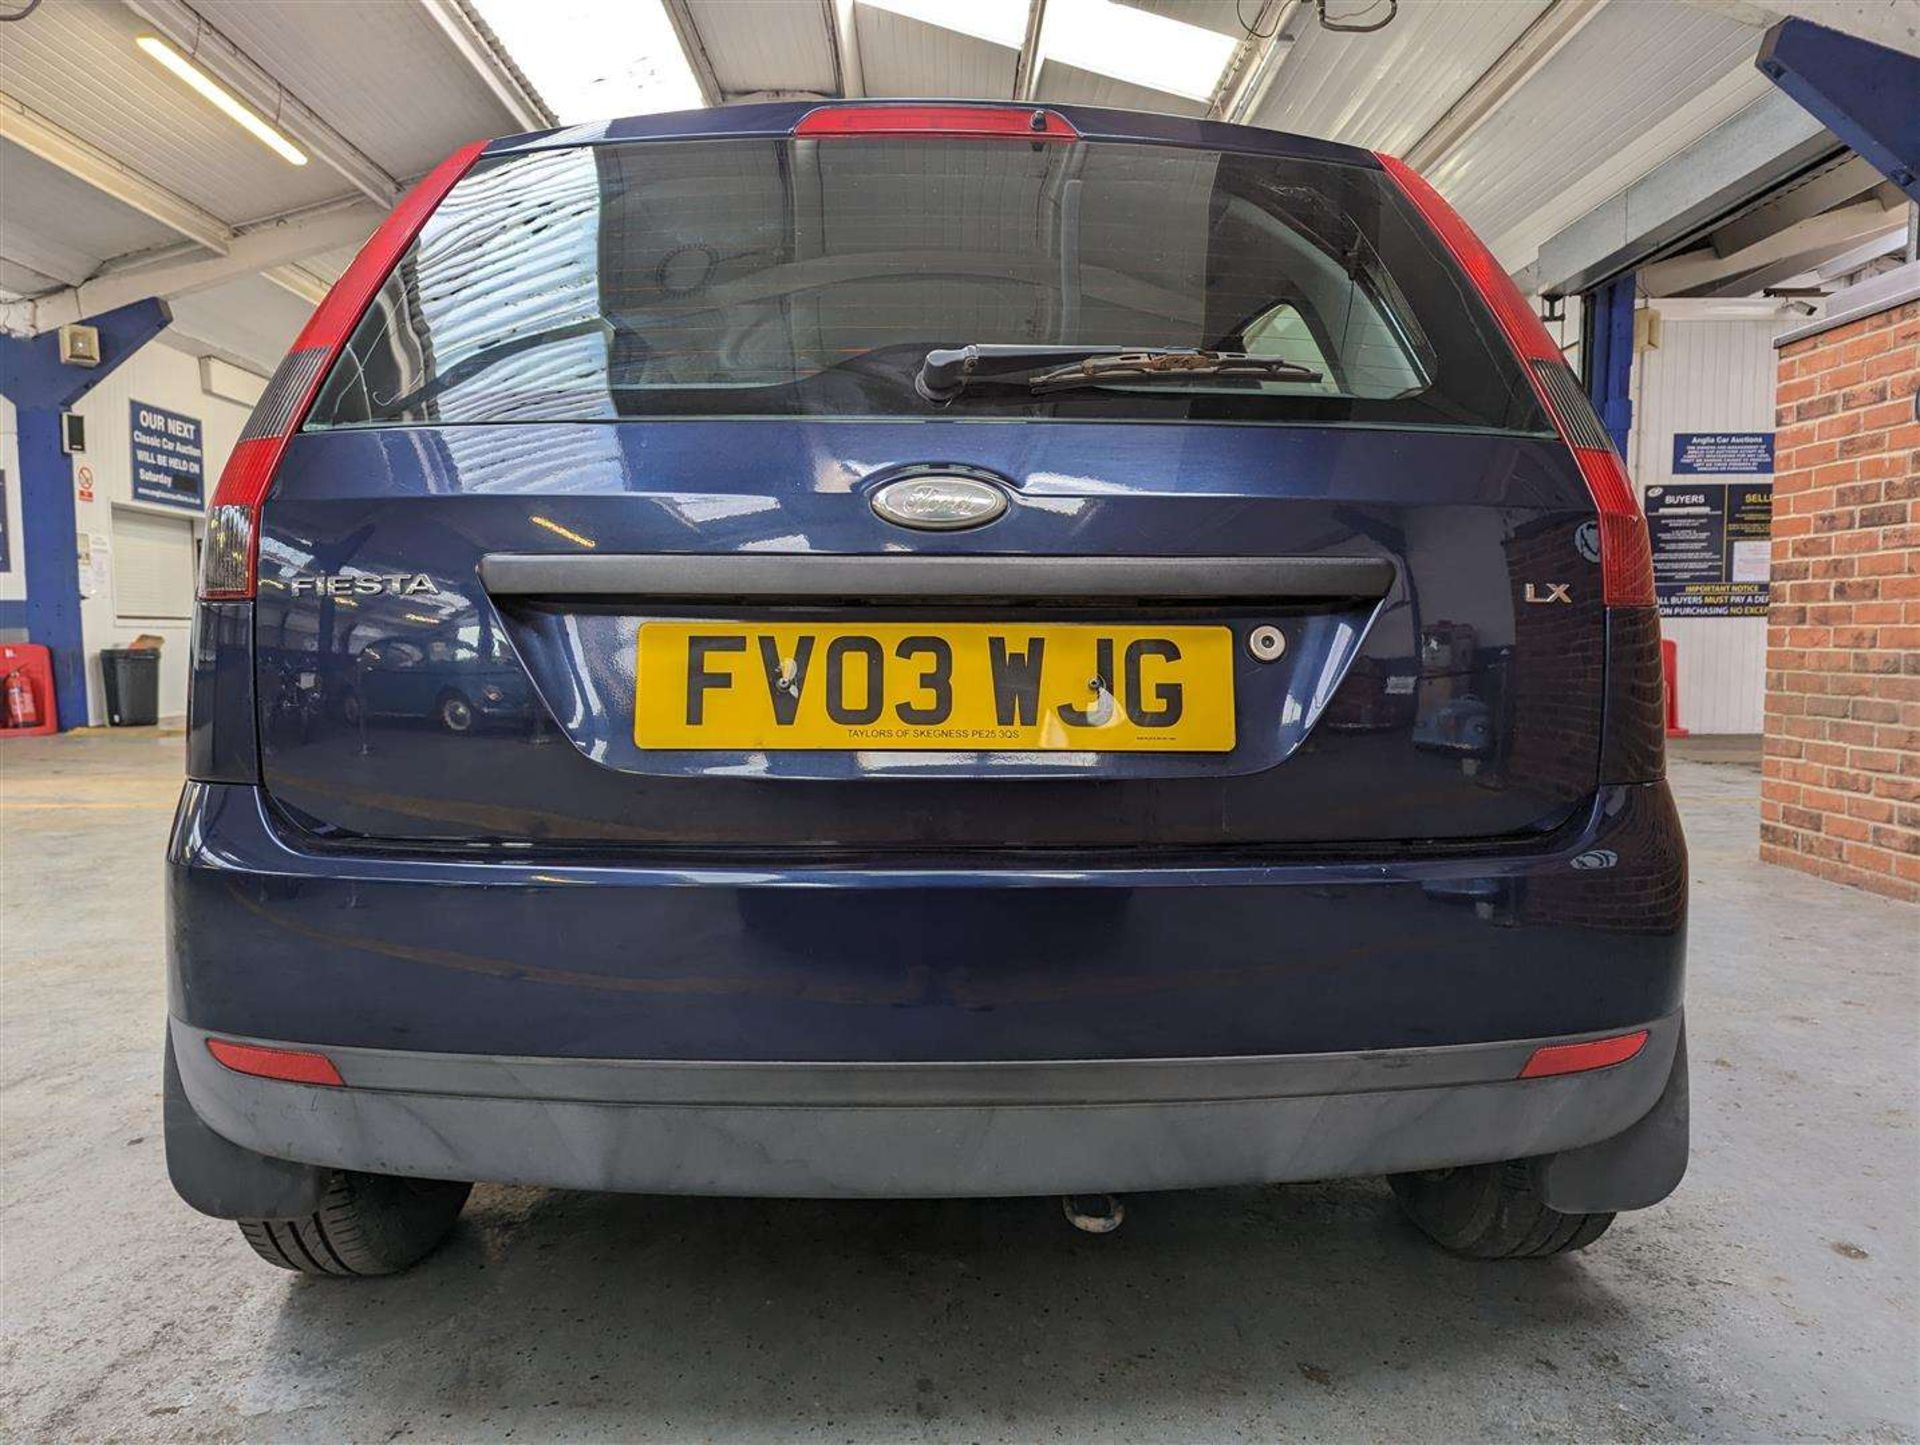 2003 FORD FIESTA LX - Image 3 of 30